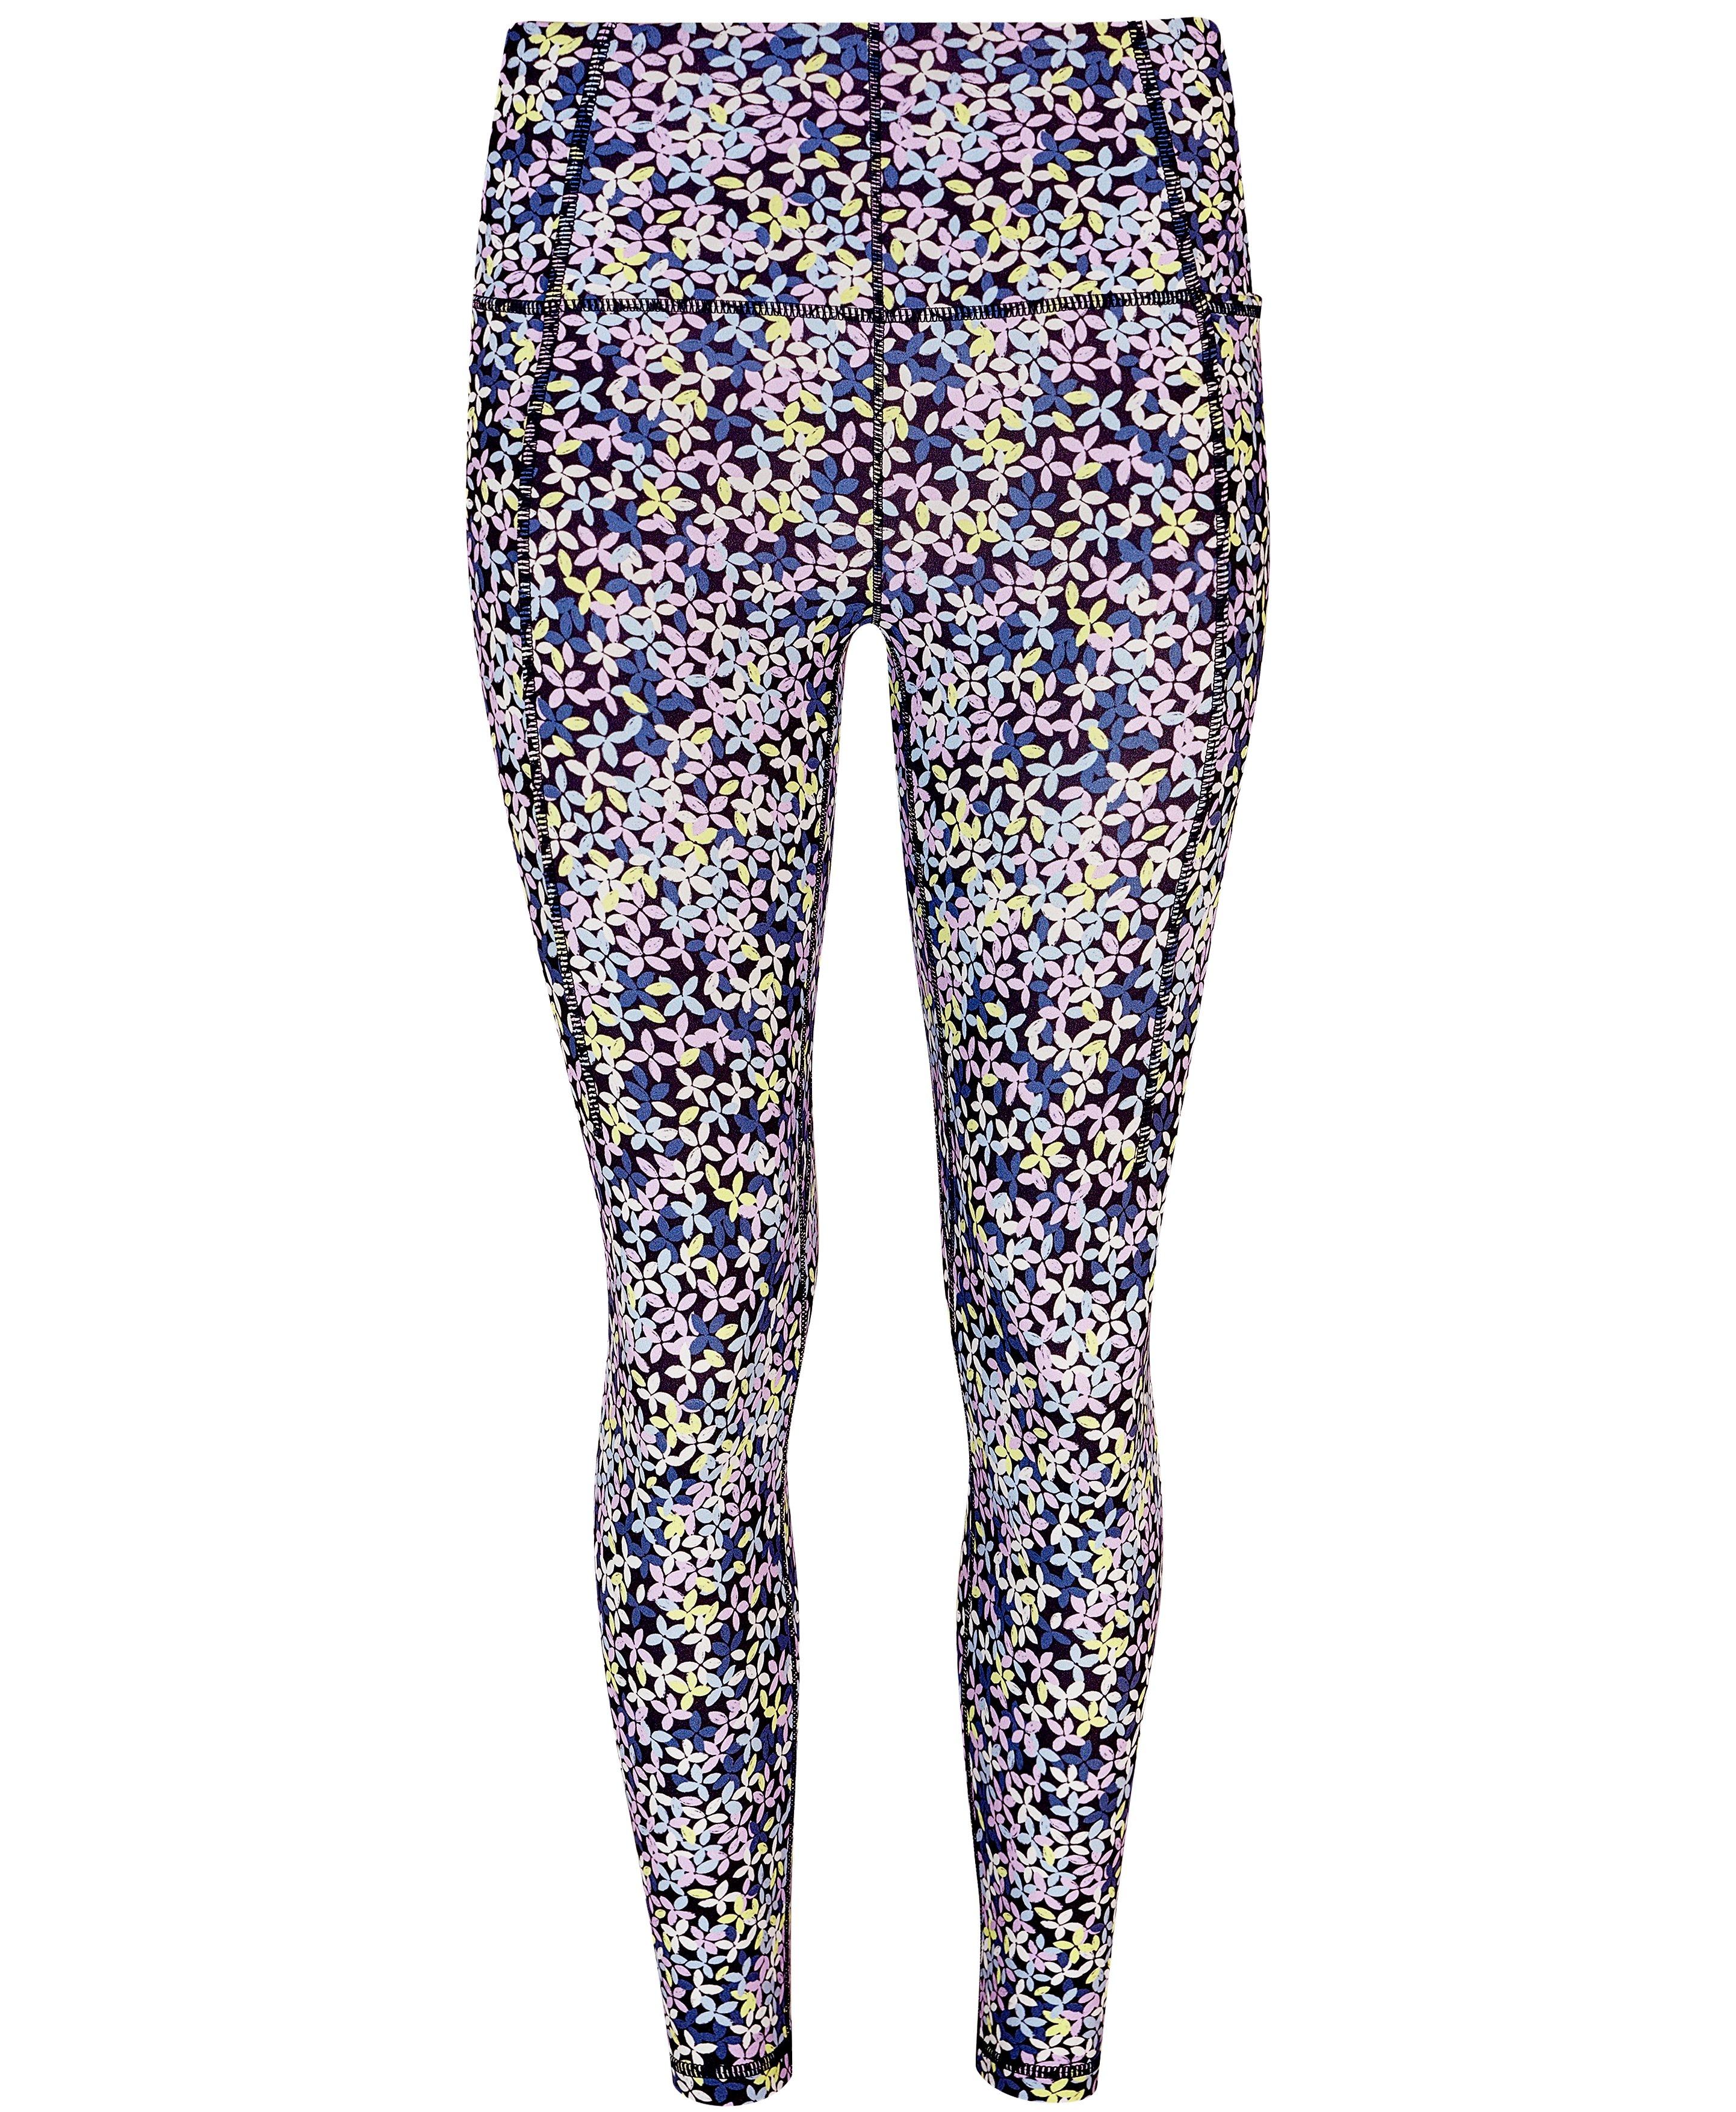 Sweaty Betty All Day floral full length print grey leggings Size